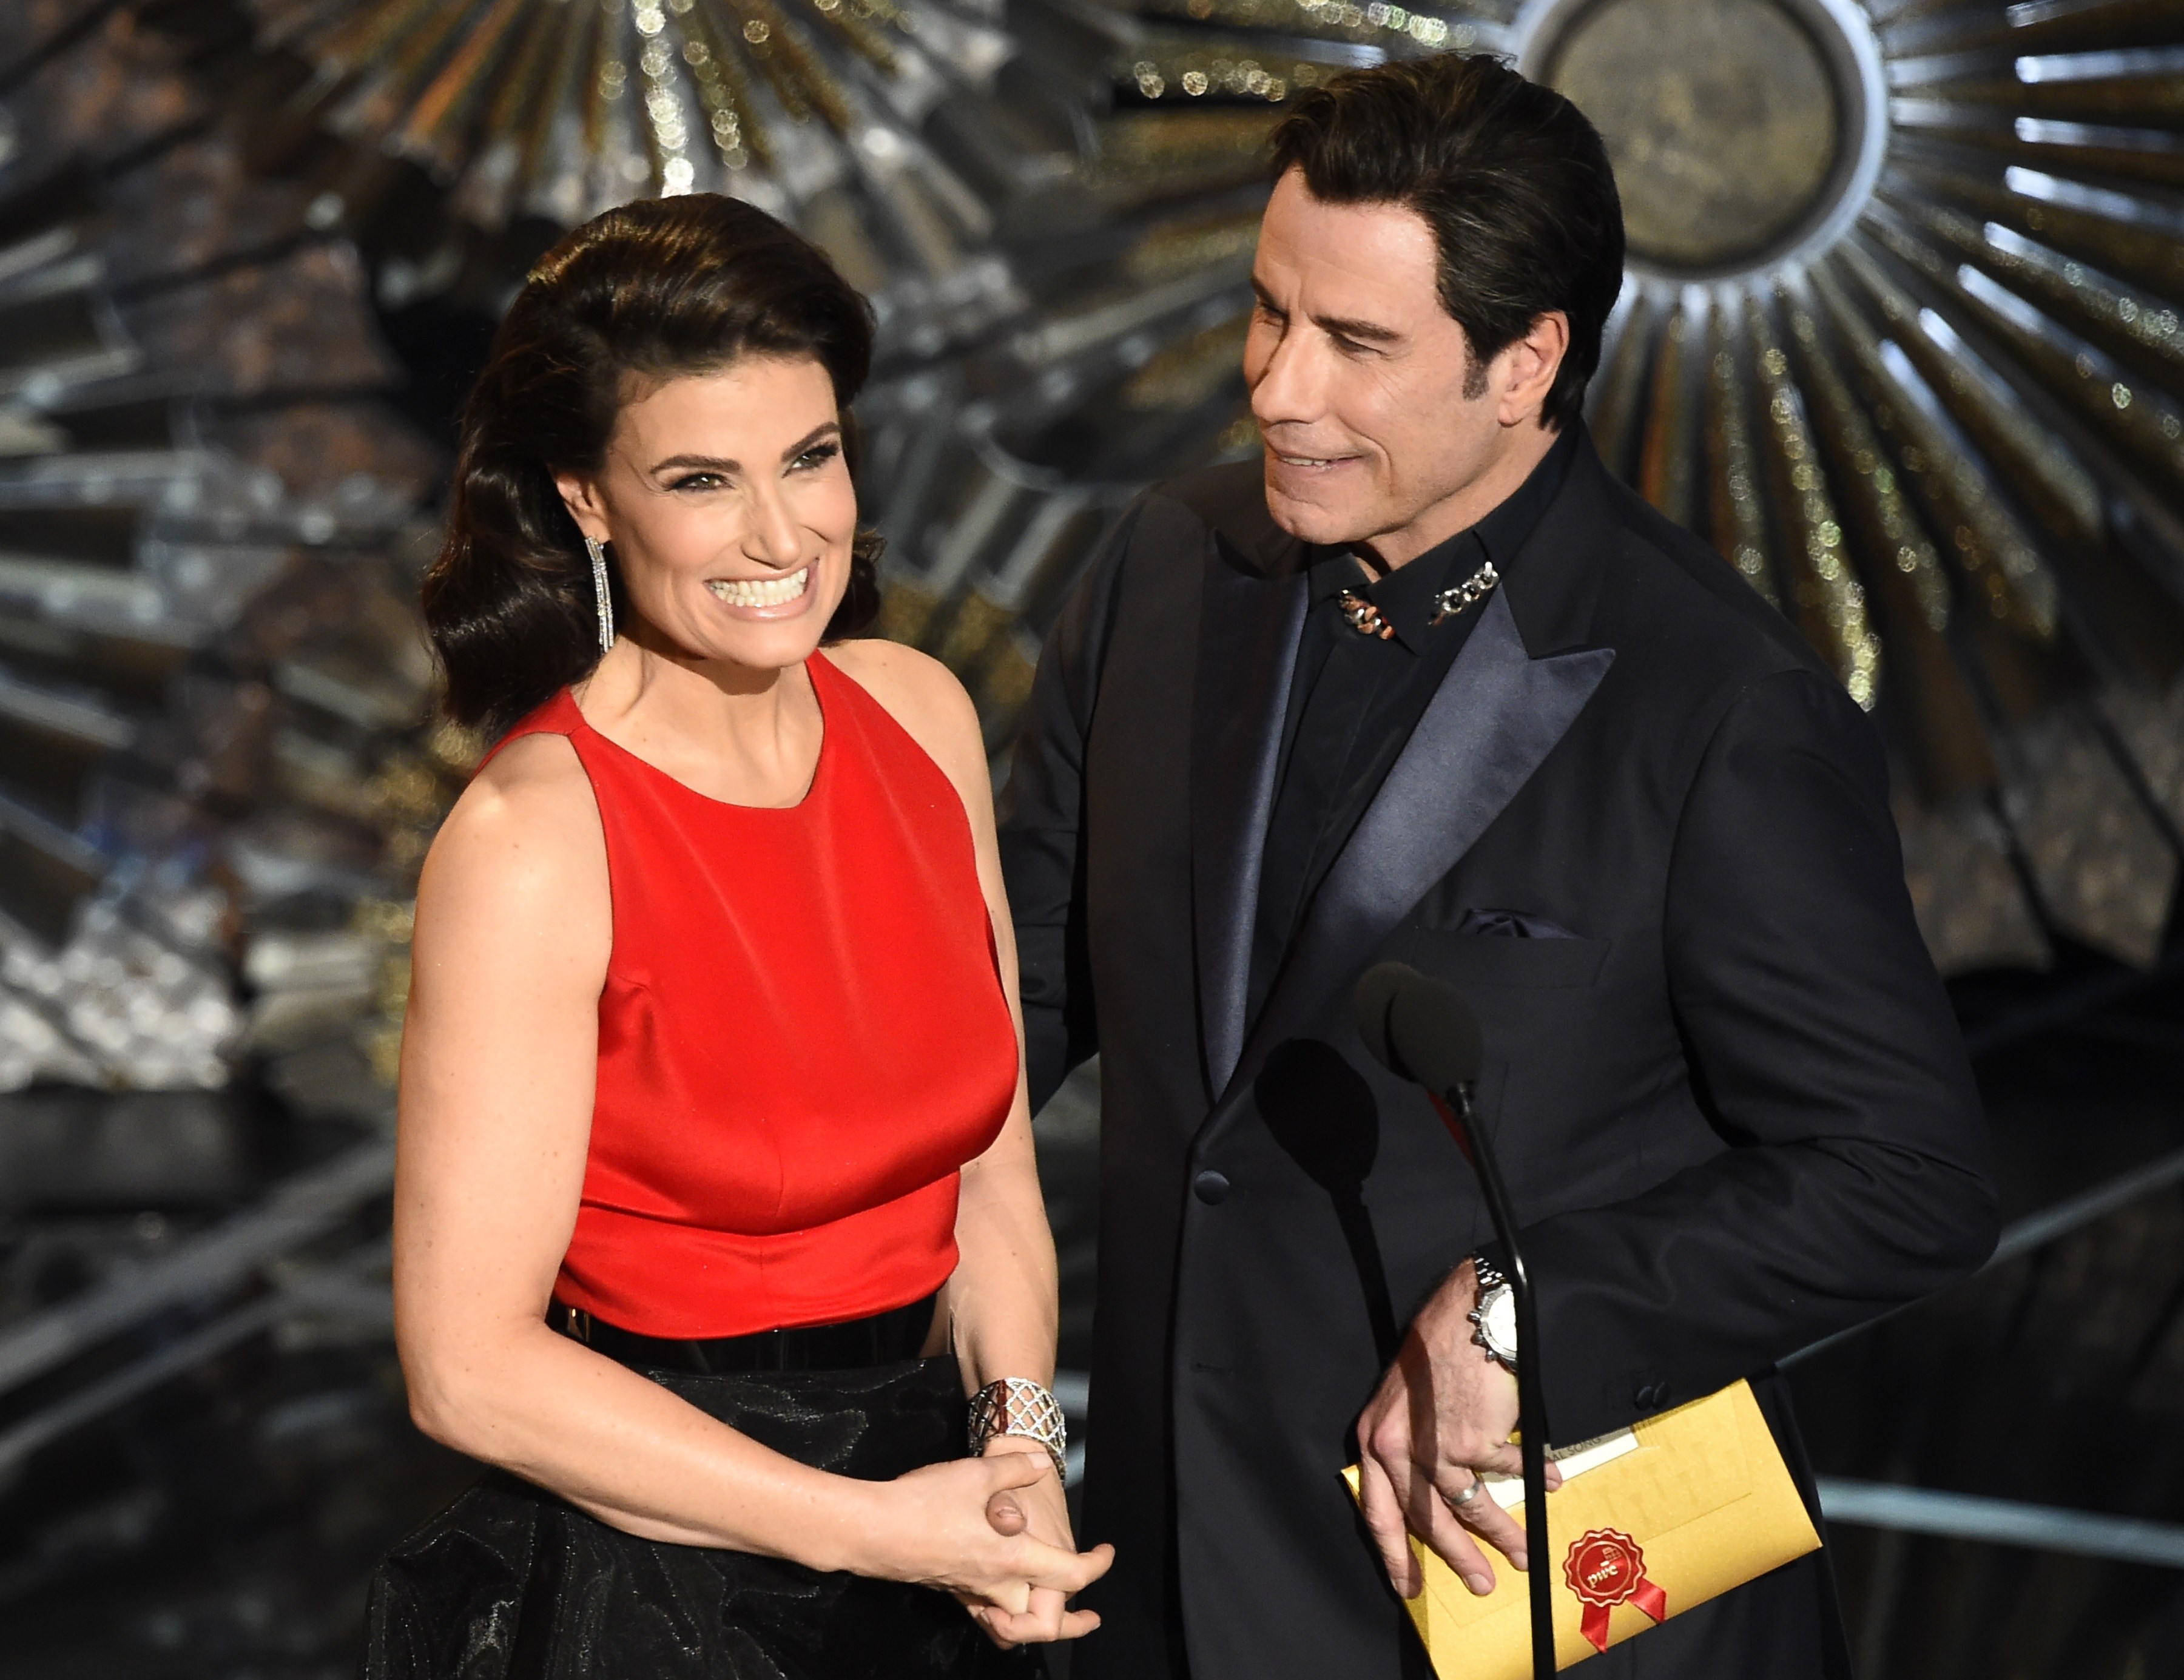 Idina Menzel in a red dress and John Travolta in a black suit on stage at the Oscars. 